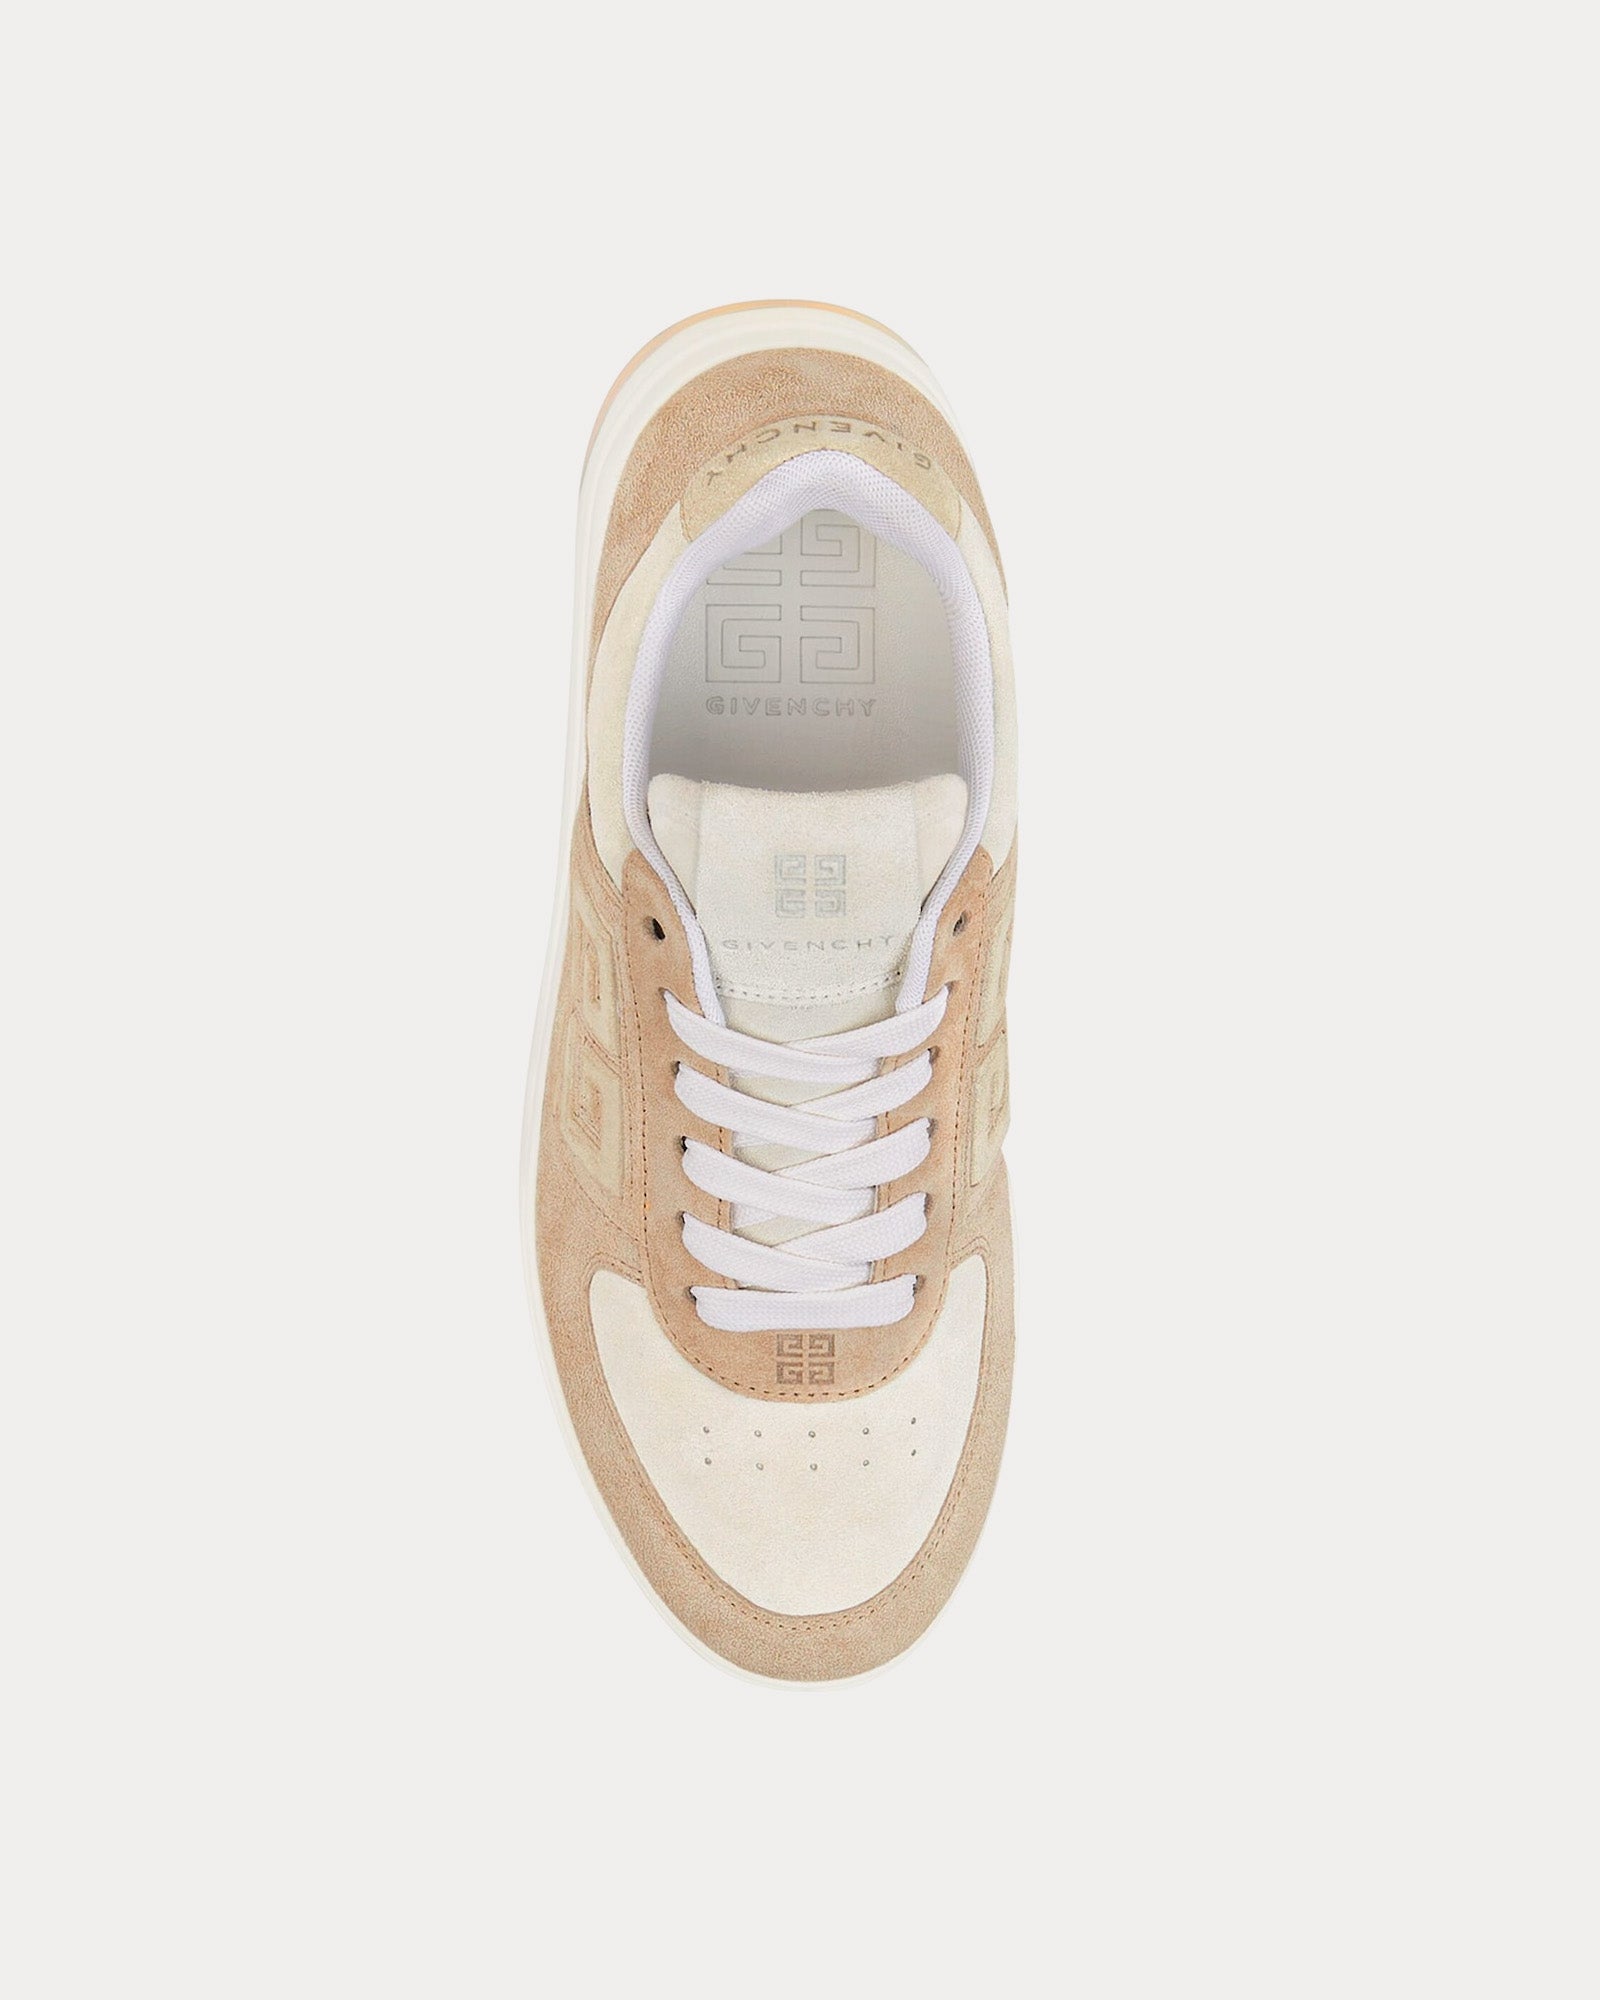 Givenchy - G4 Suede Beige / White Low Top Sneakers